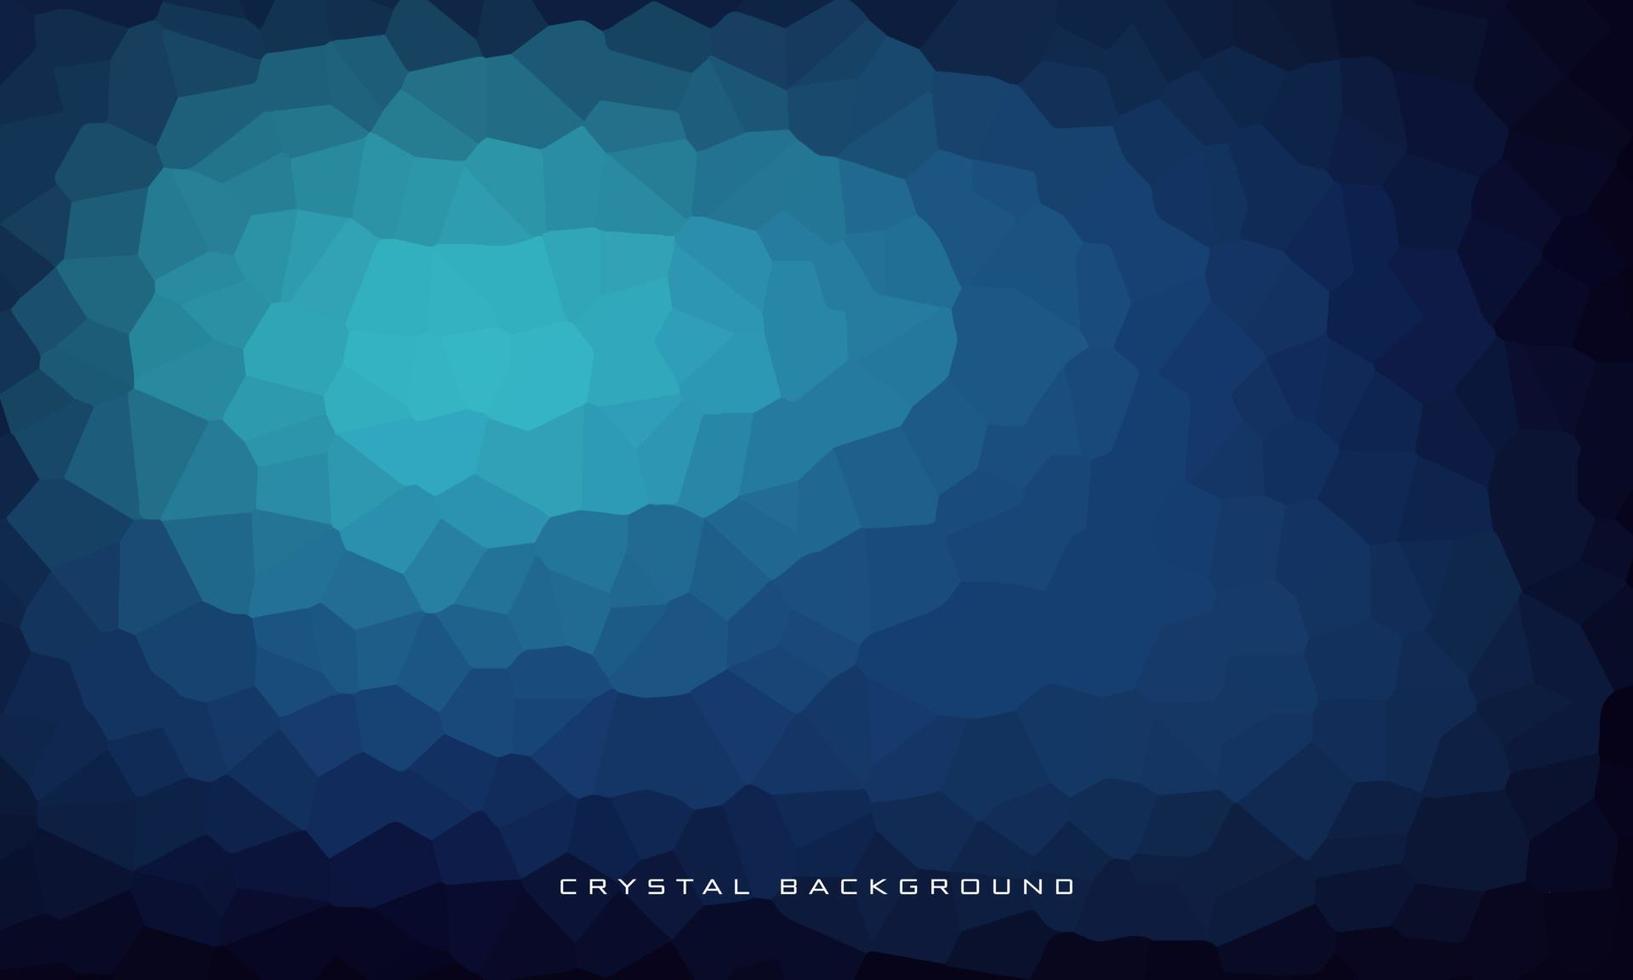 Gradient crystal background with blue color domination. Can be used for banner, poster, brochure, web page, cover, and other. Eps10 Vector design